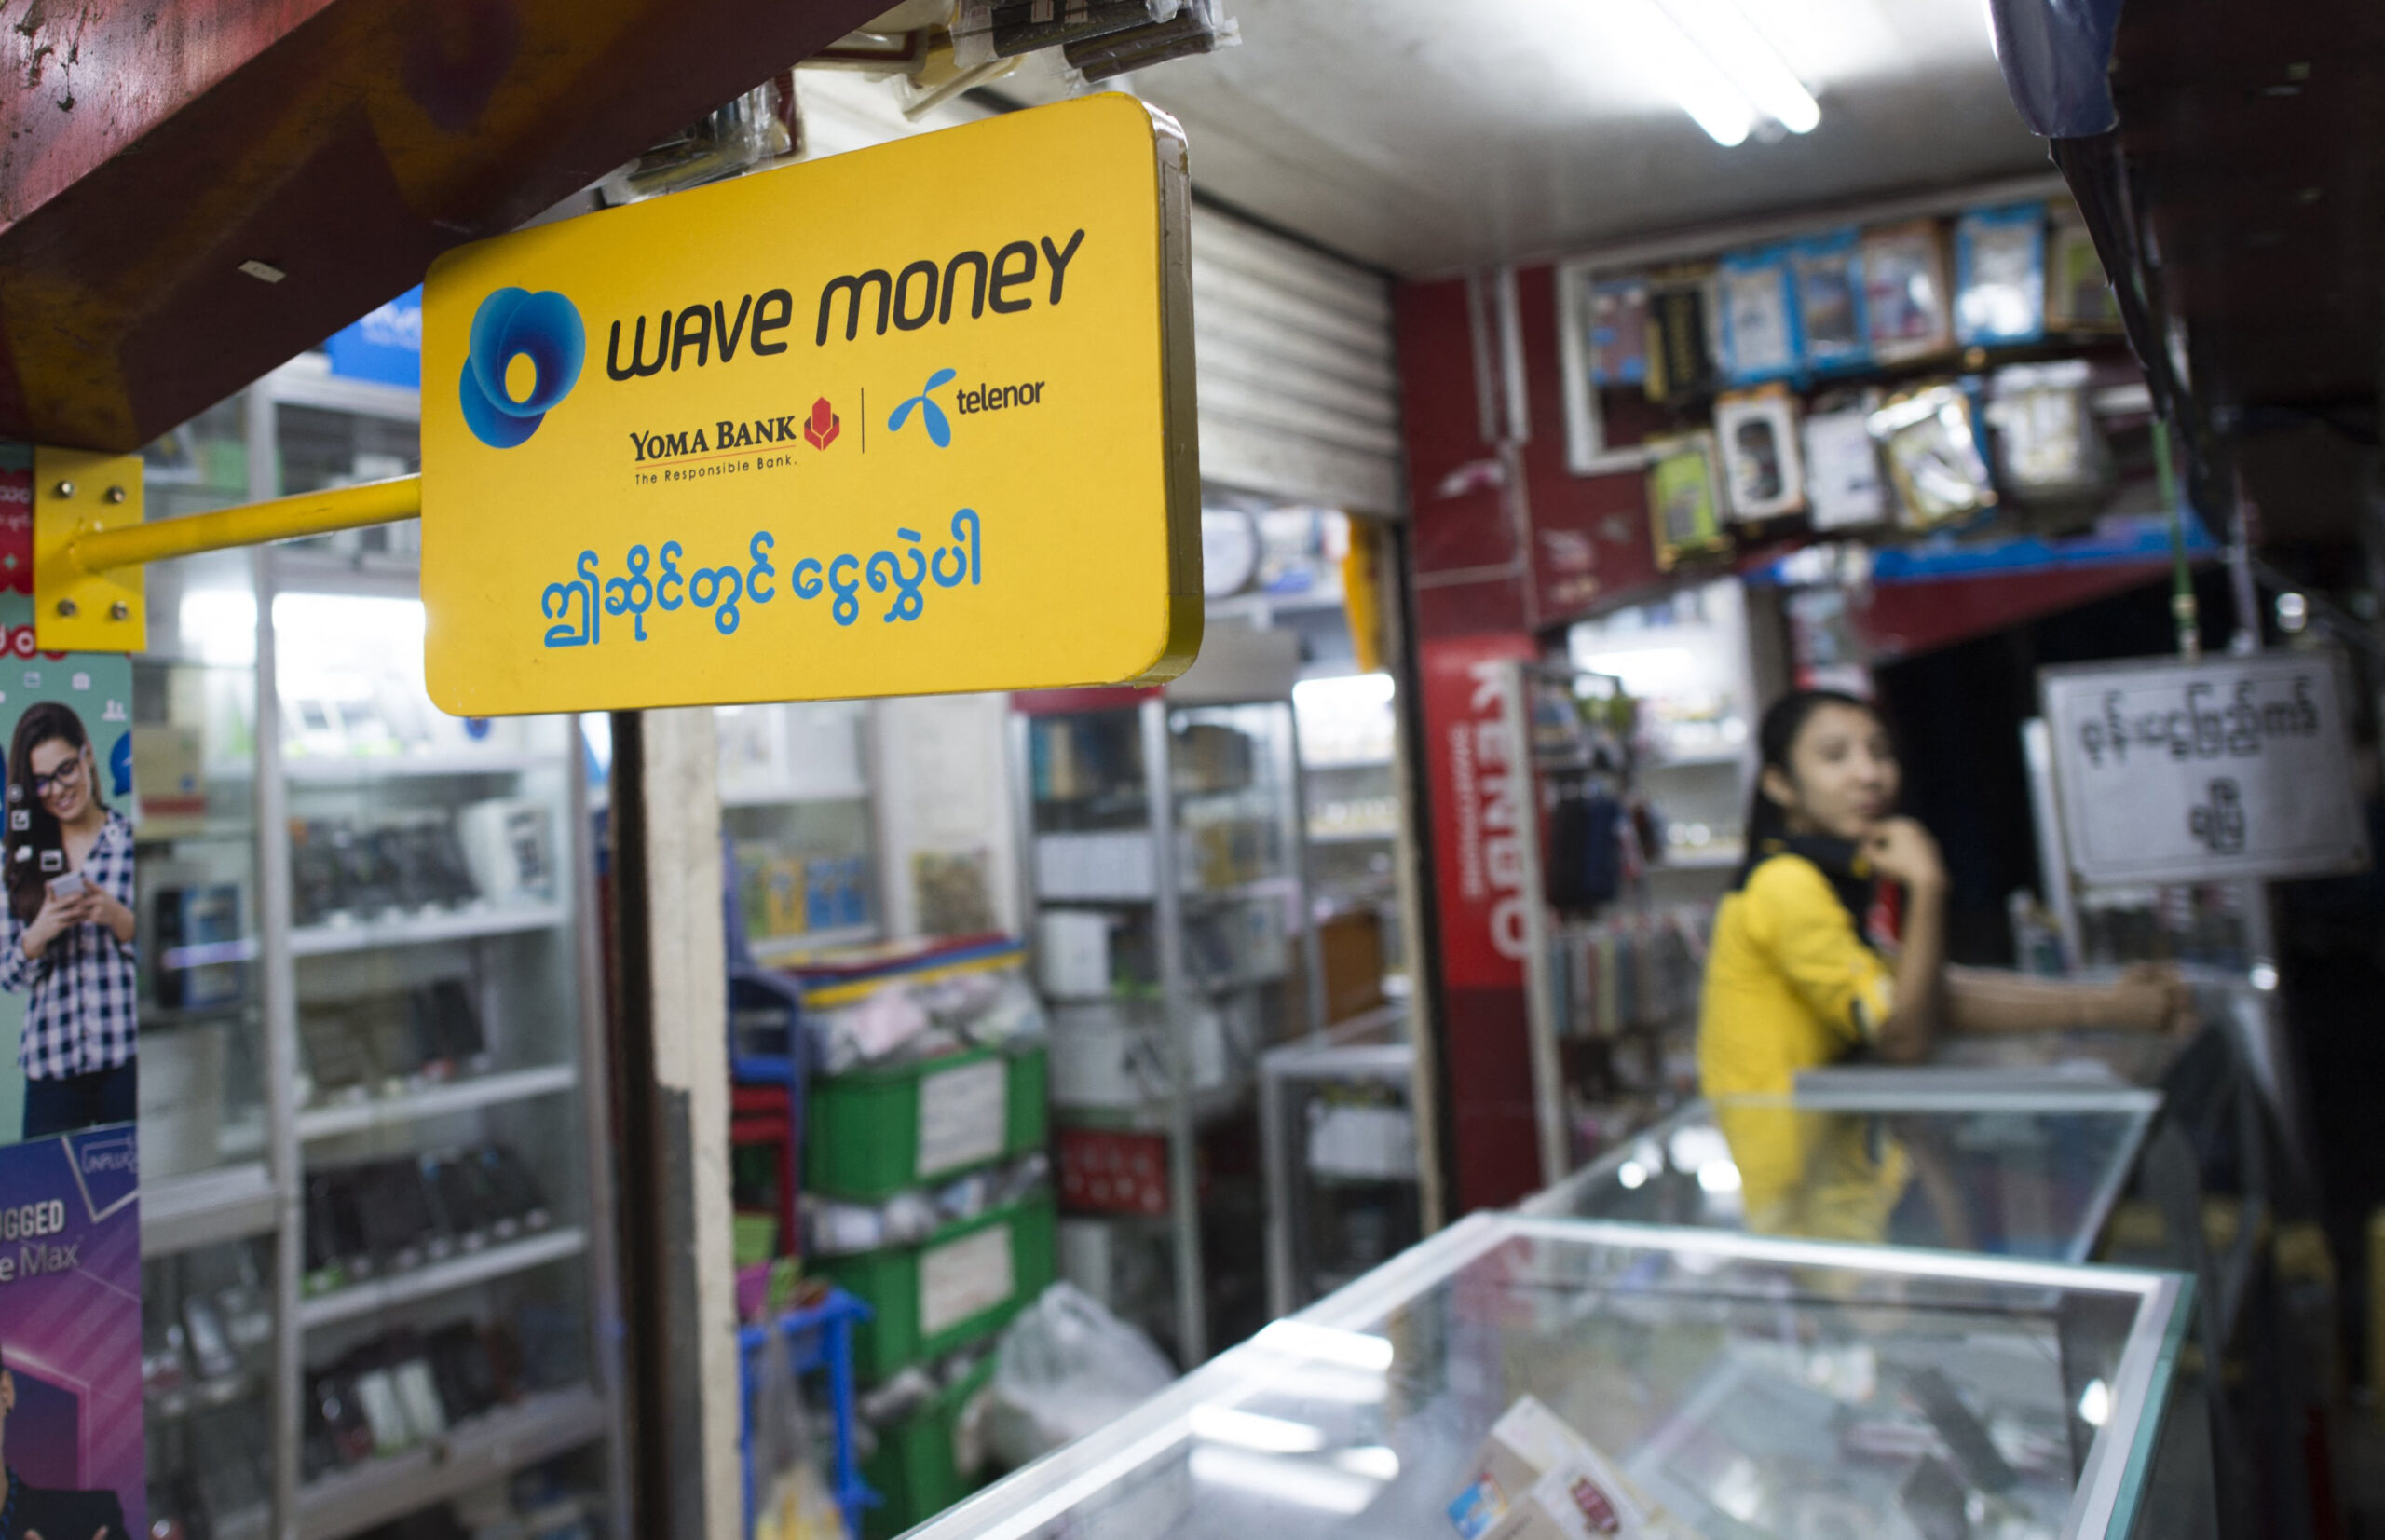 A shop owner advertises the Wave Money mobile banking service. (AFP)